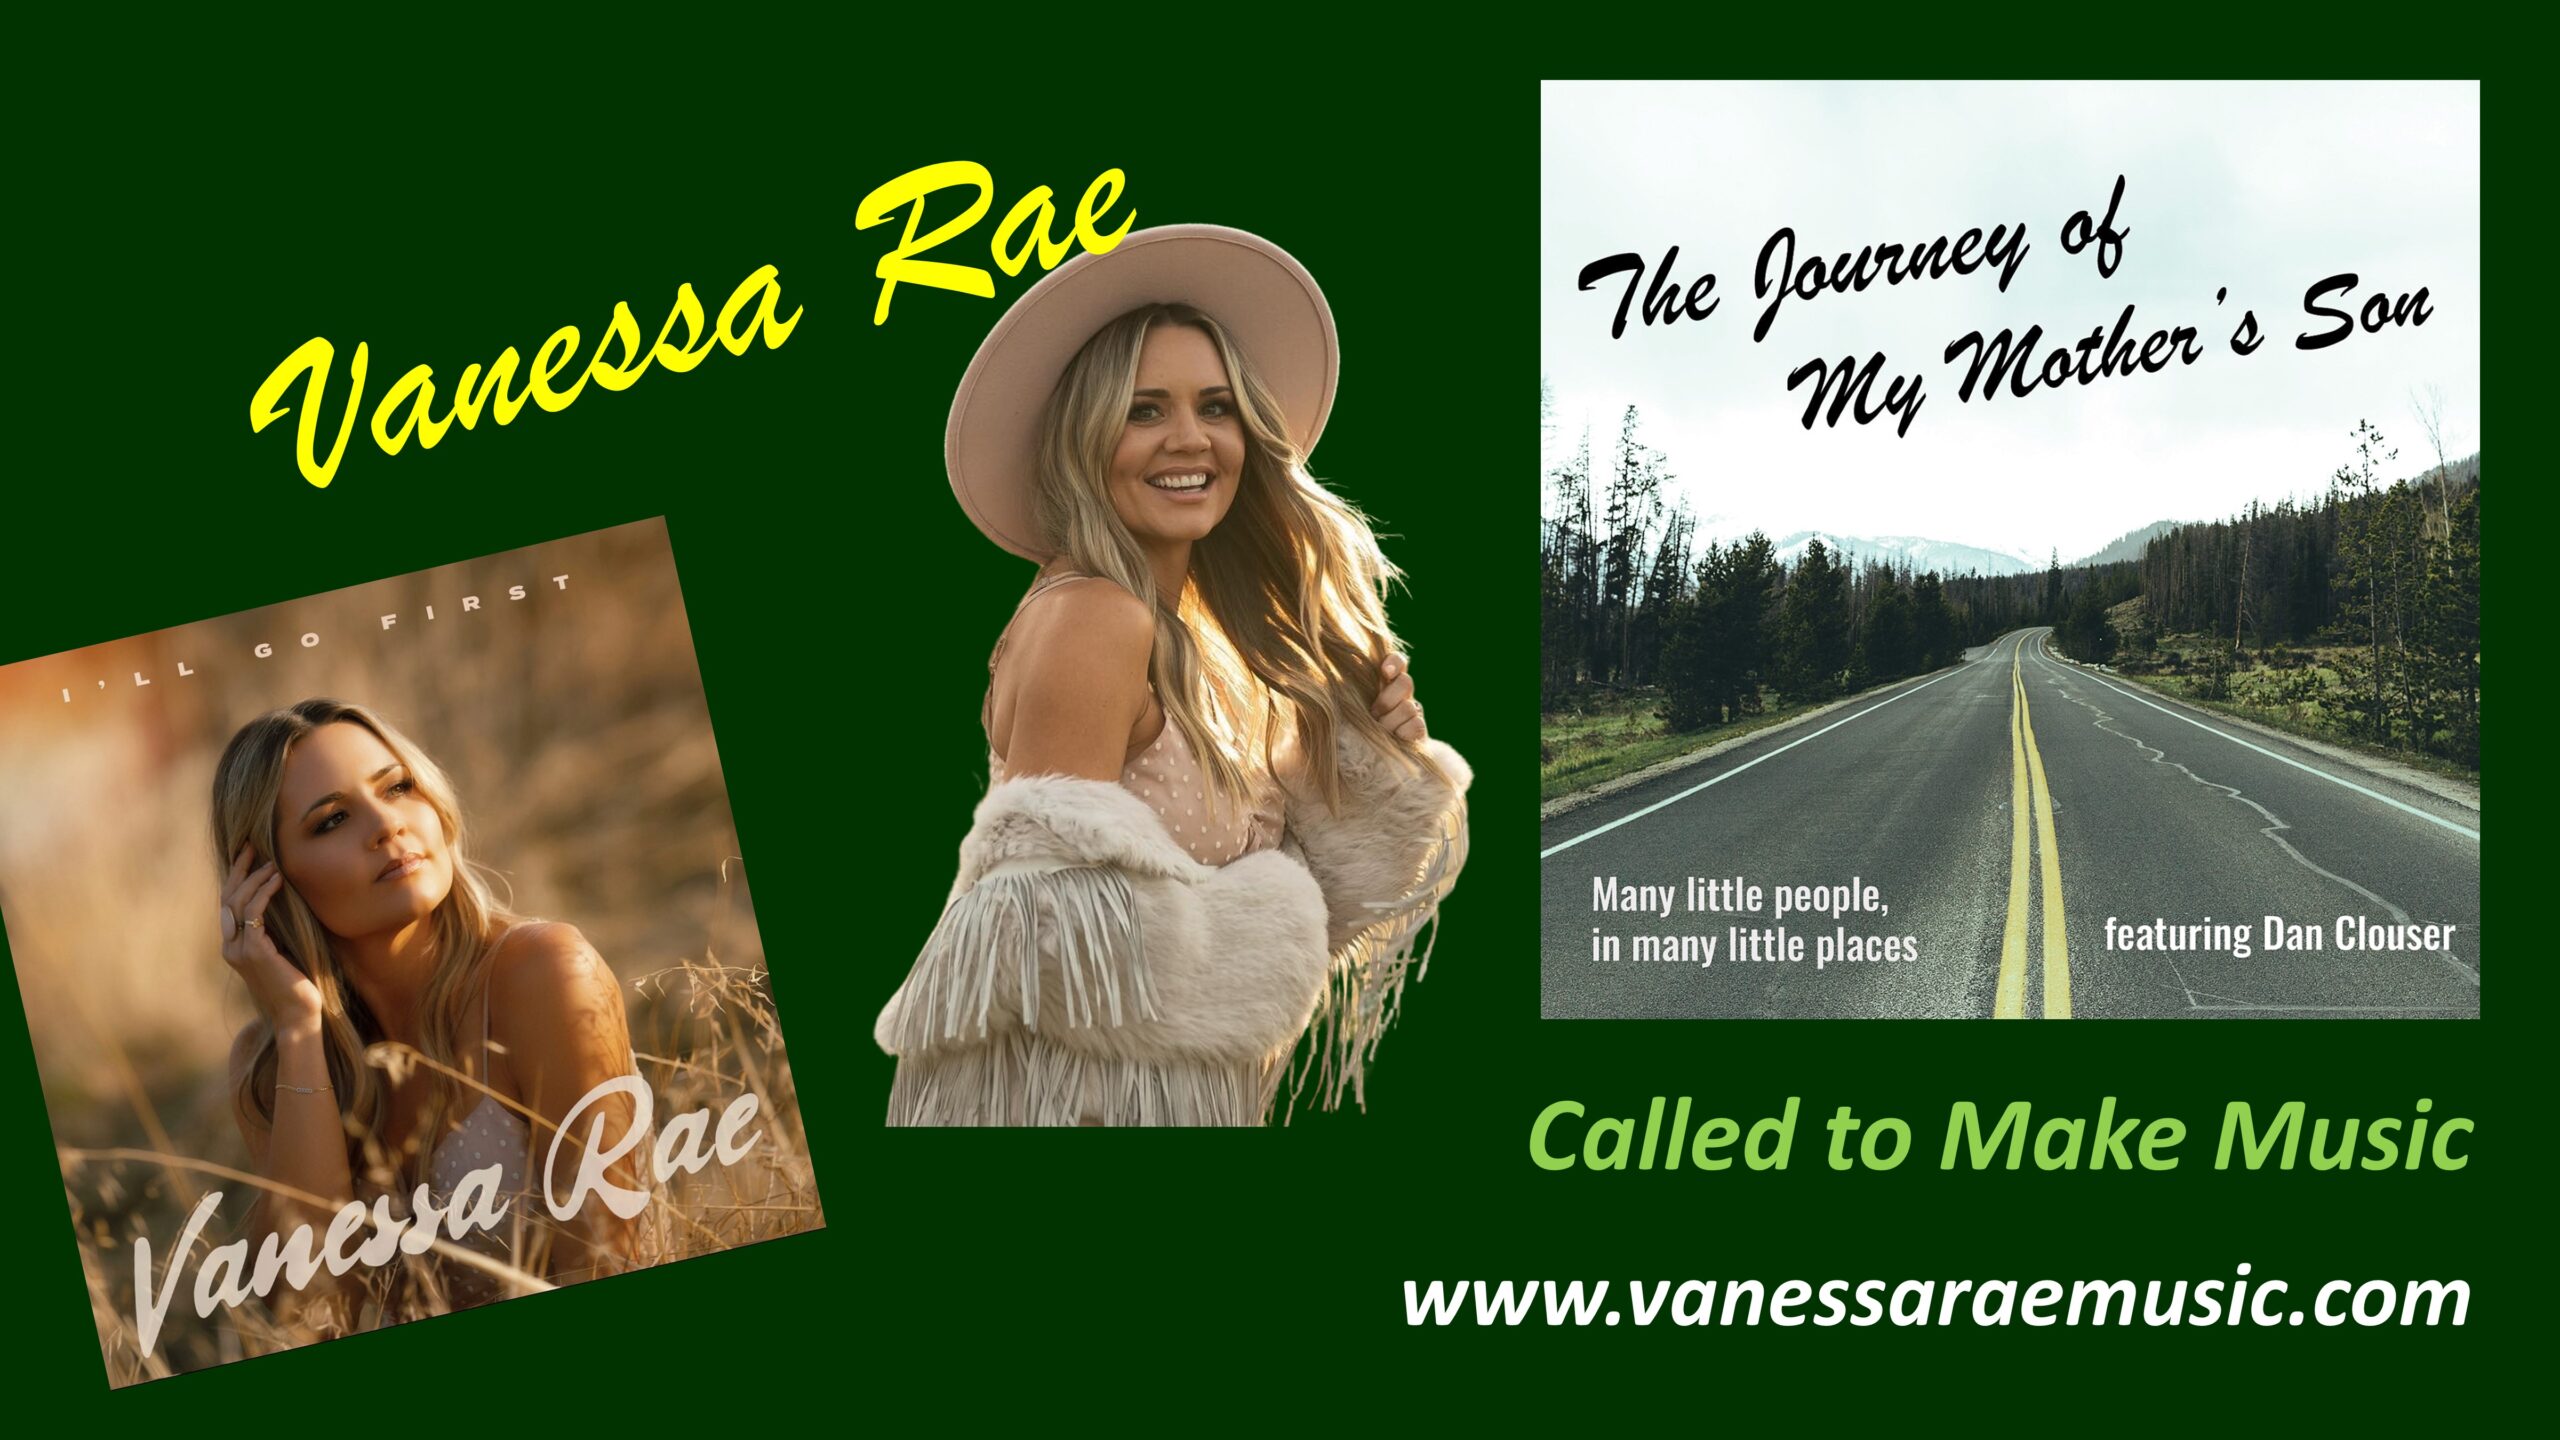 Vanessa Rae Called to Make Music Journey of My Mother's Son